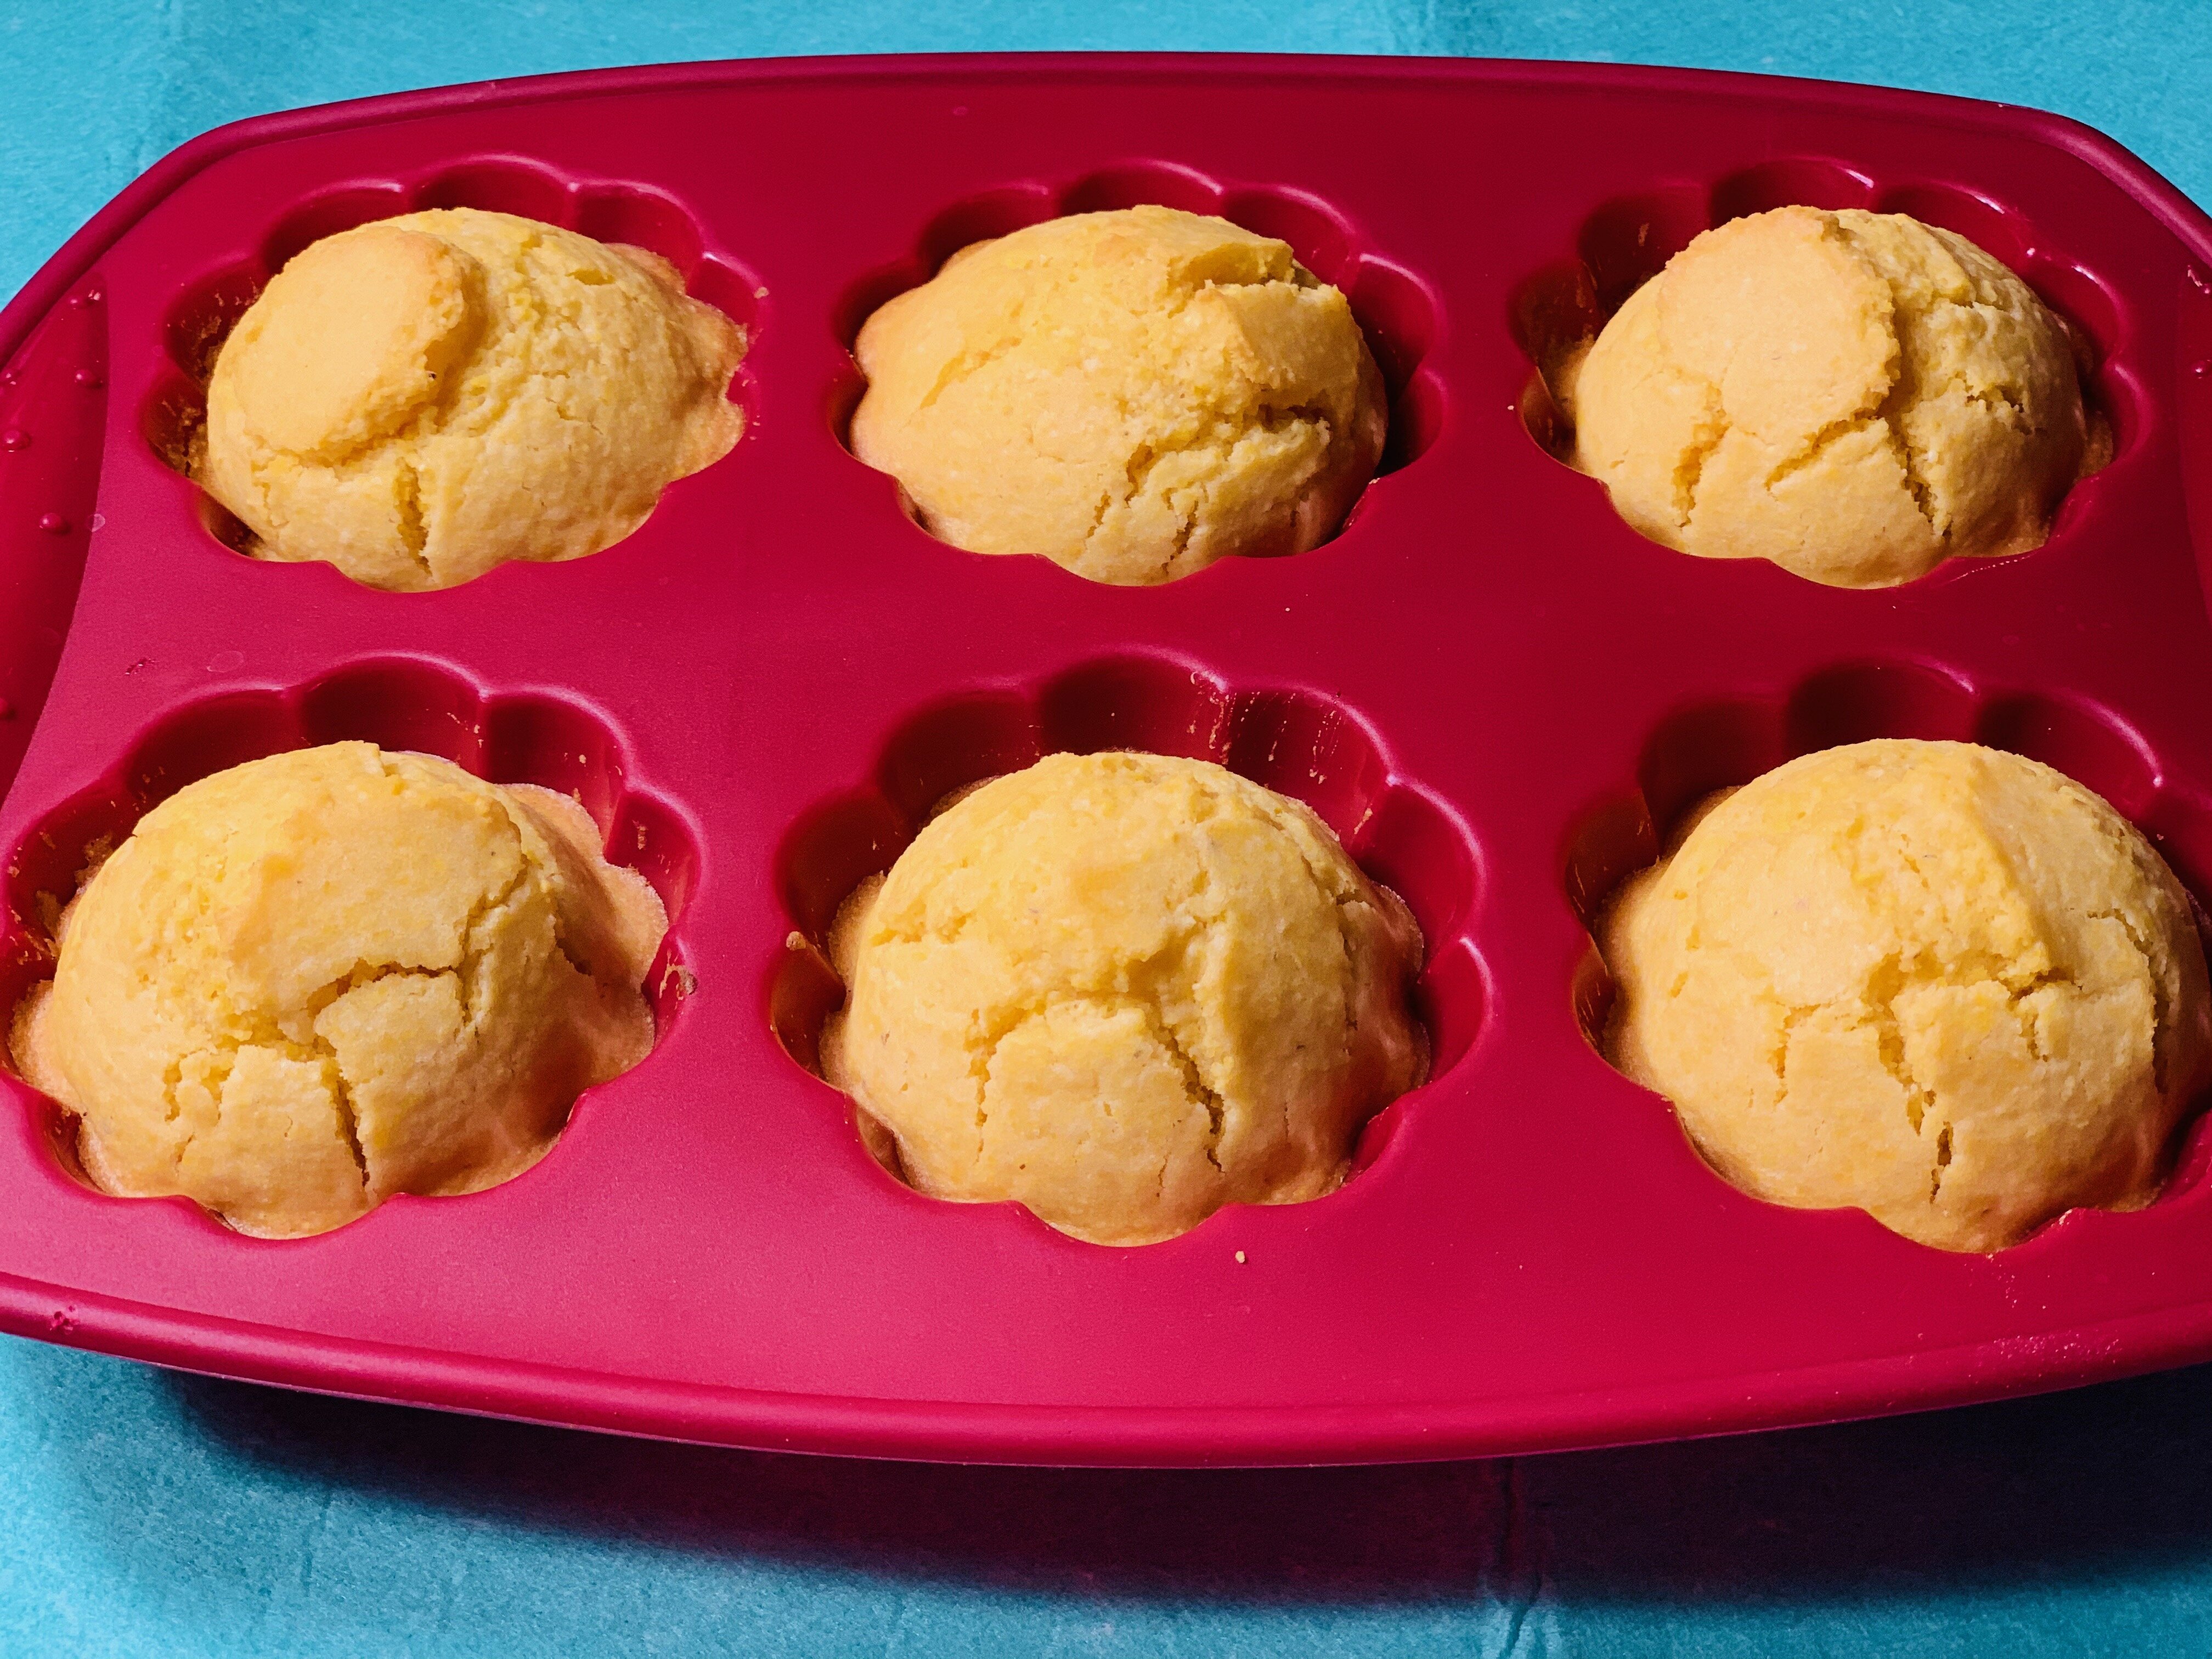 Twin Towers Trading 6 Cup Non-Stick Silicone Muffin Pan with Lid & Reviews